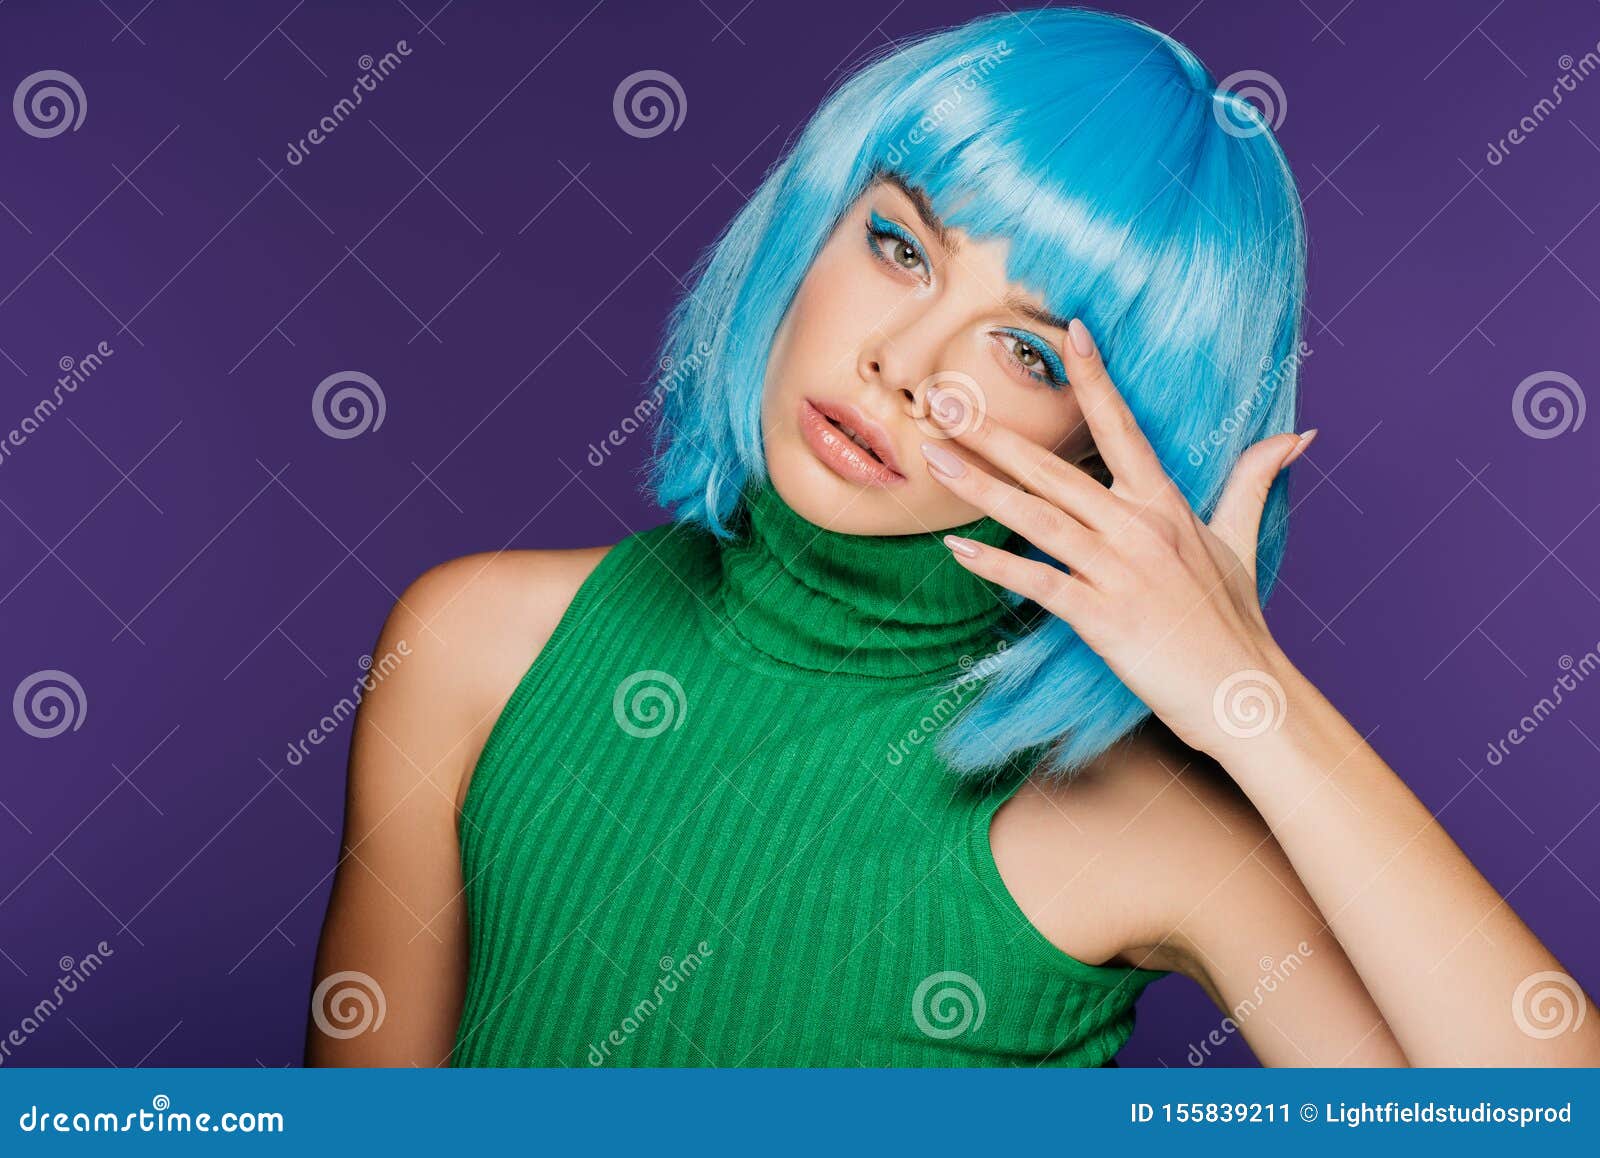 3. Tumblr Girl with Blue Hair - wide 3